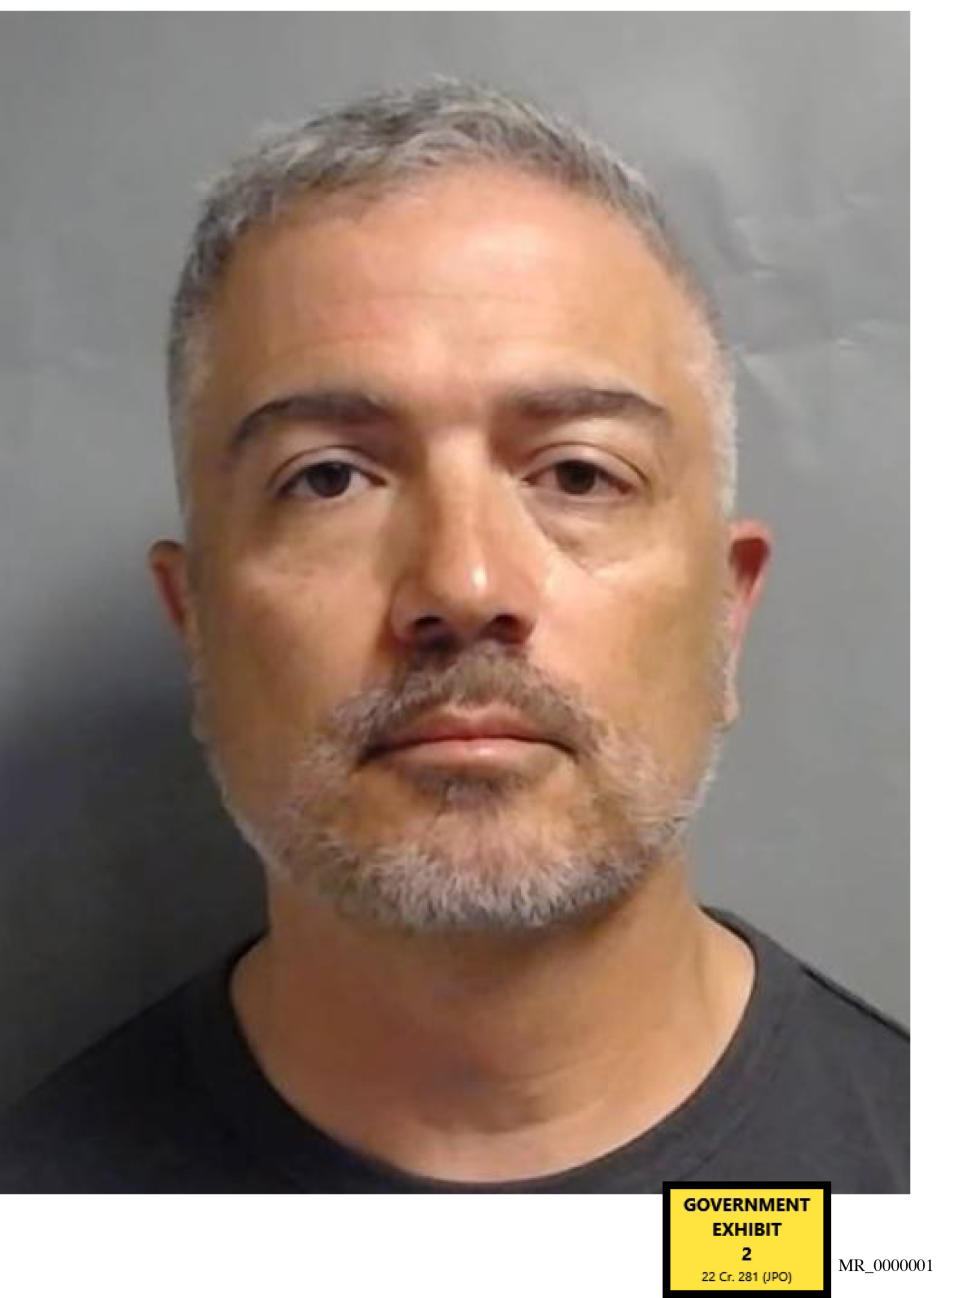 This image provided by the U.S. Attorney’s Office in the Southern District of New York on Oct. 26, 2023 shows Manny Recio, a former U.S. Drug Enforcement Administration supervisor. Recio is accused of involvement in a scheme to sell government secrets to defense lawyers seeking to represent deep-pocketed clients, a jury in Manhattan was told in late October 2023. (U.S. Attorney’s Office via AP)